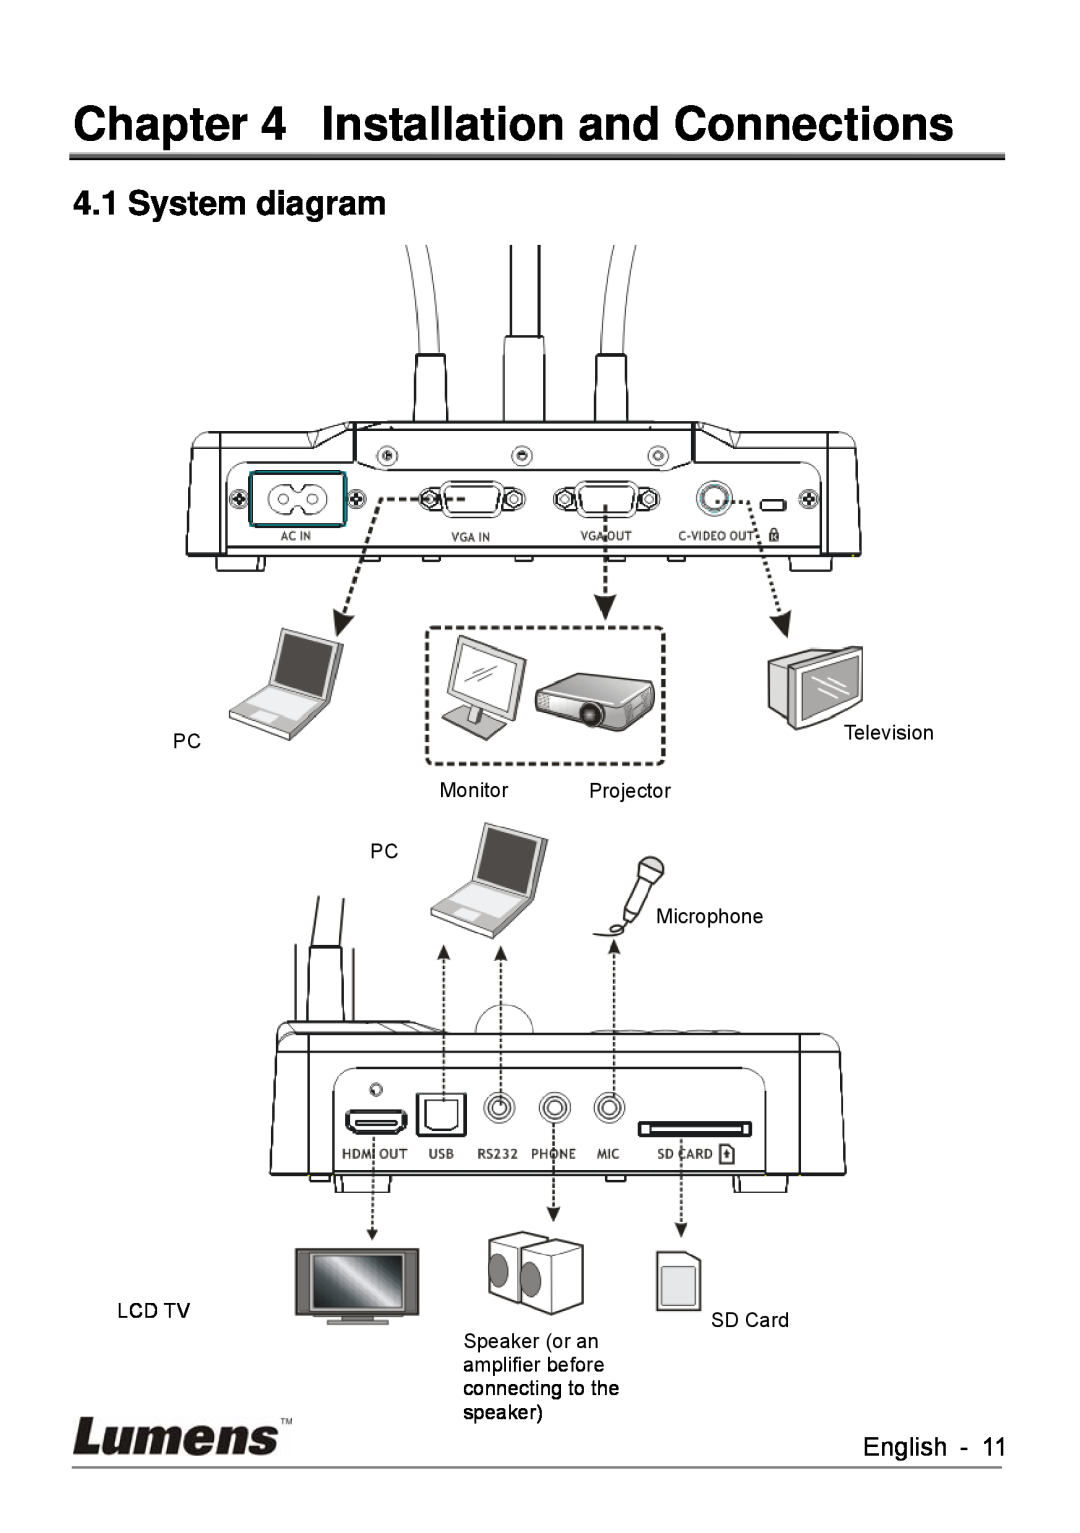 Lumens Technology DC260 Installation and Connections, System diagram, Monitor Projector PC Microphone, Lcd Tv, SD Card 